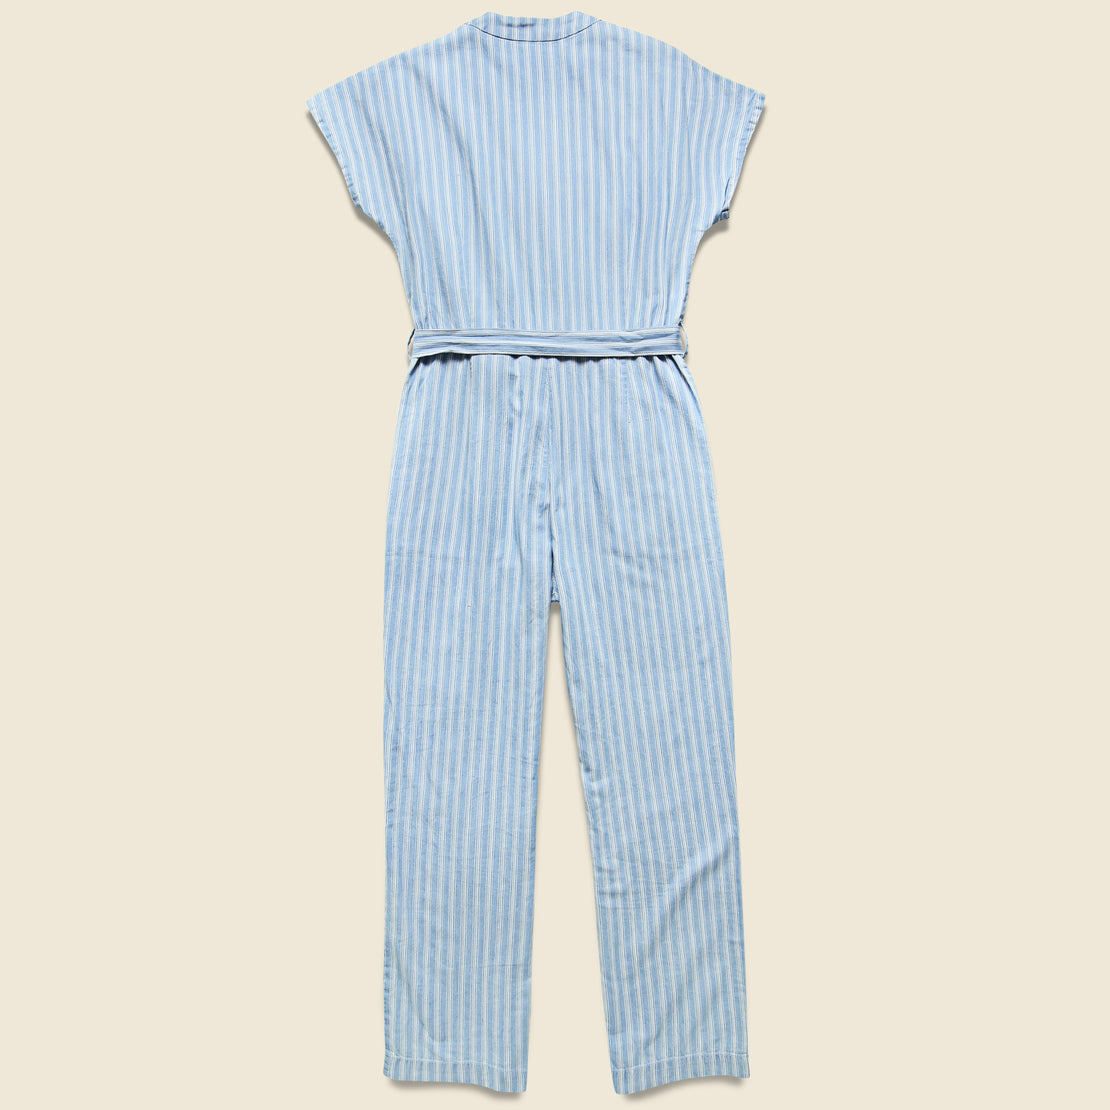 Striped Denim Jumpsuit - Blue - Nice Things - STAG Provisions - W - Onepiece - Jumpsuit